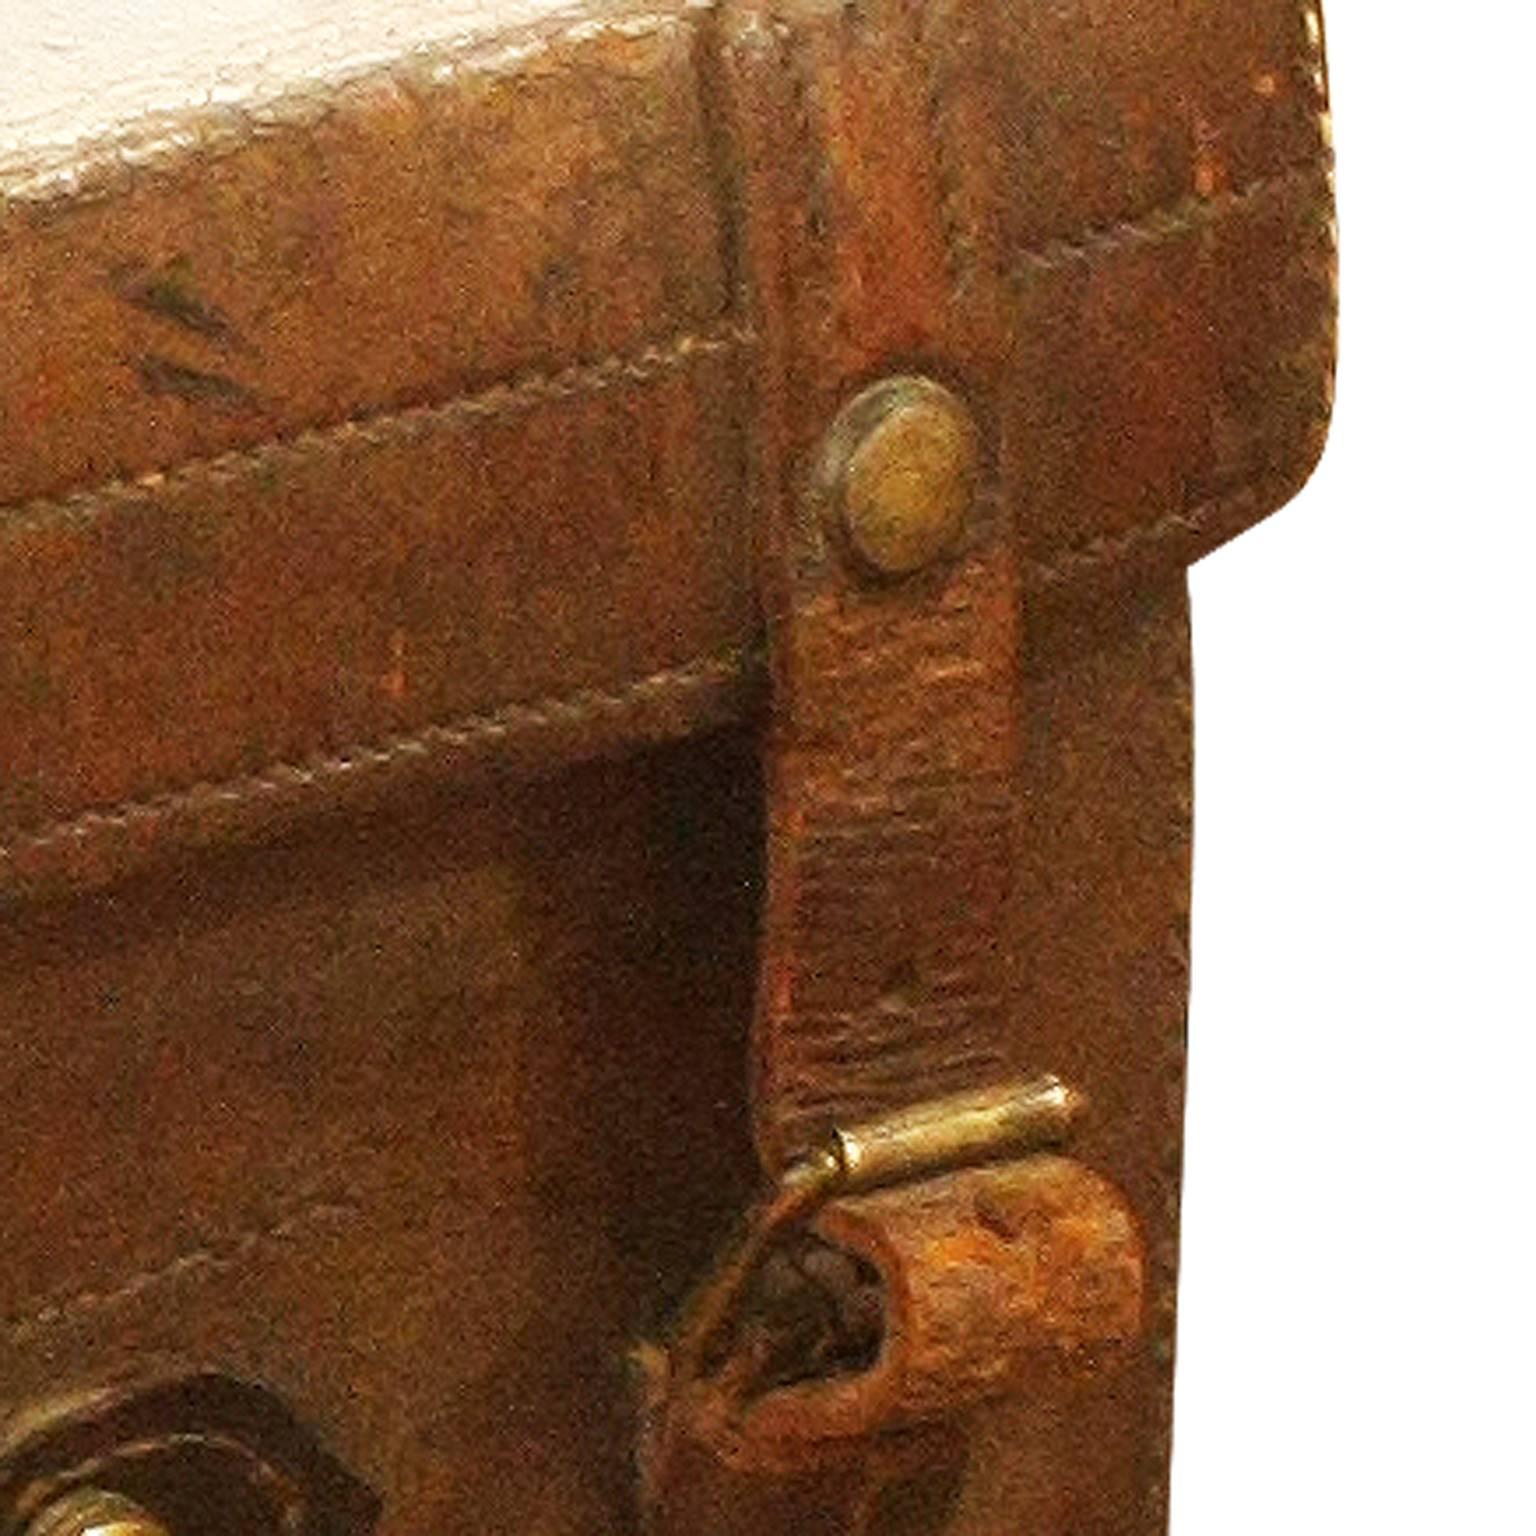 Great Britain (UK) 19th century English leather box on stand.